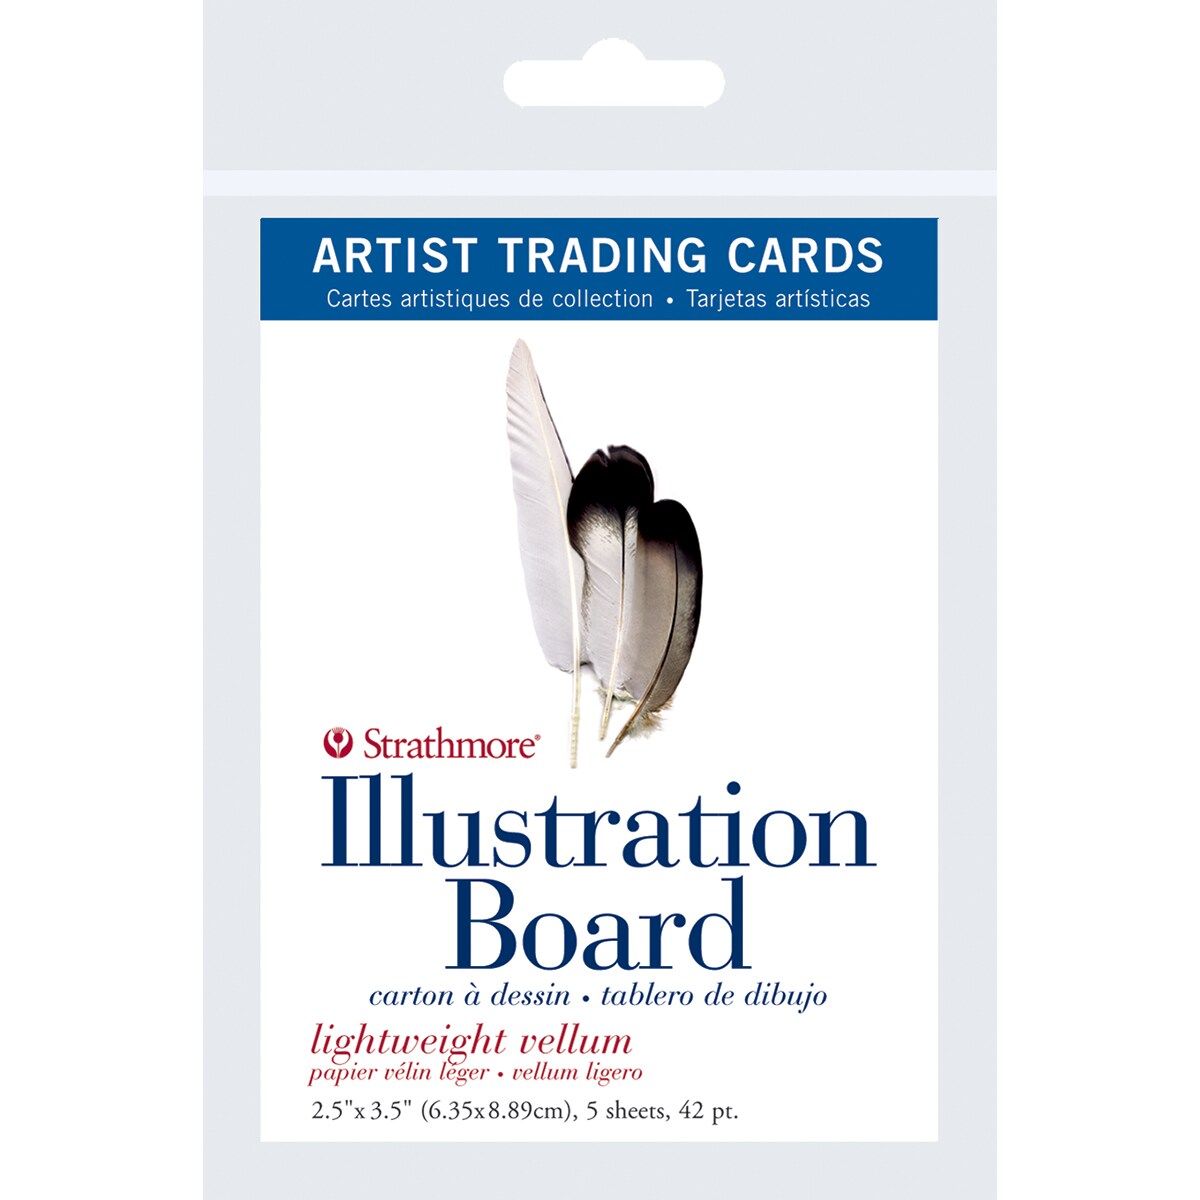 Artist Trading Cards (and books!)